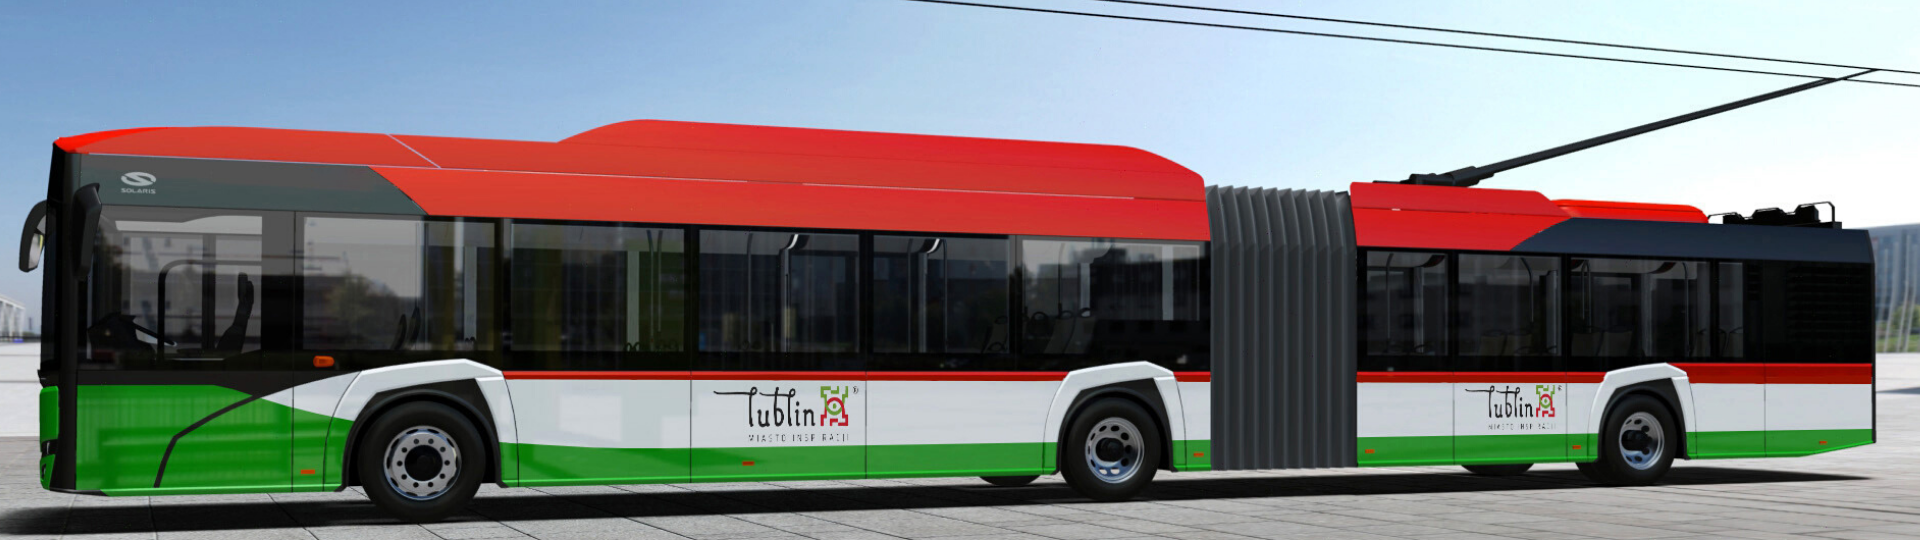 Lublin opts for electric Solaris buses